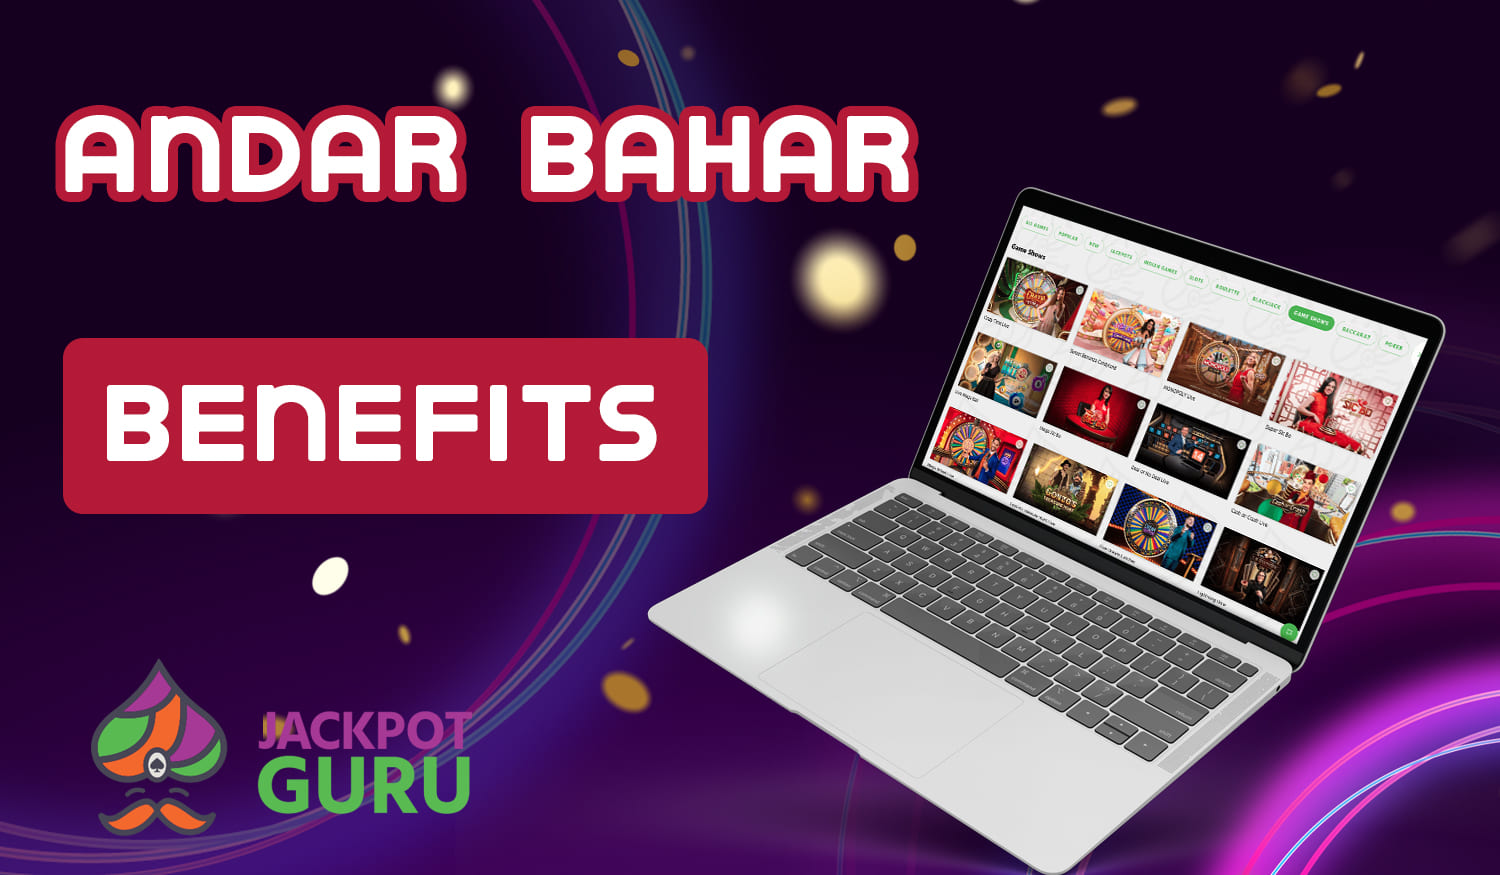 What are the main advantages of playing Andar Bahar on Jackpot Guru website